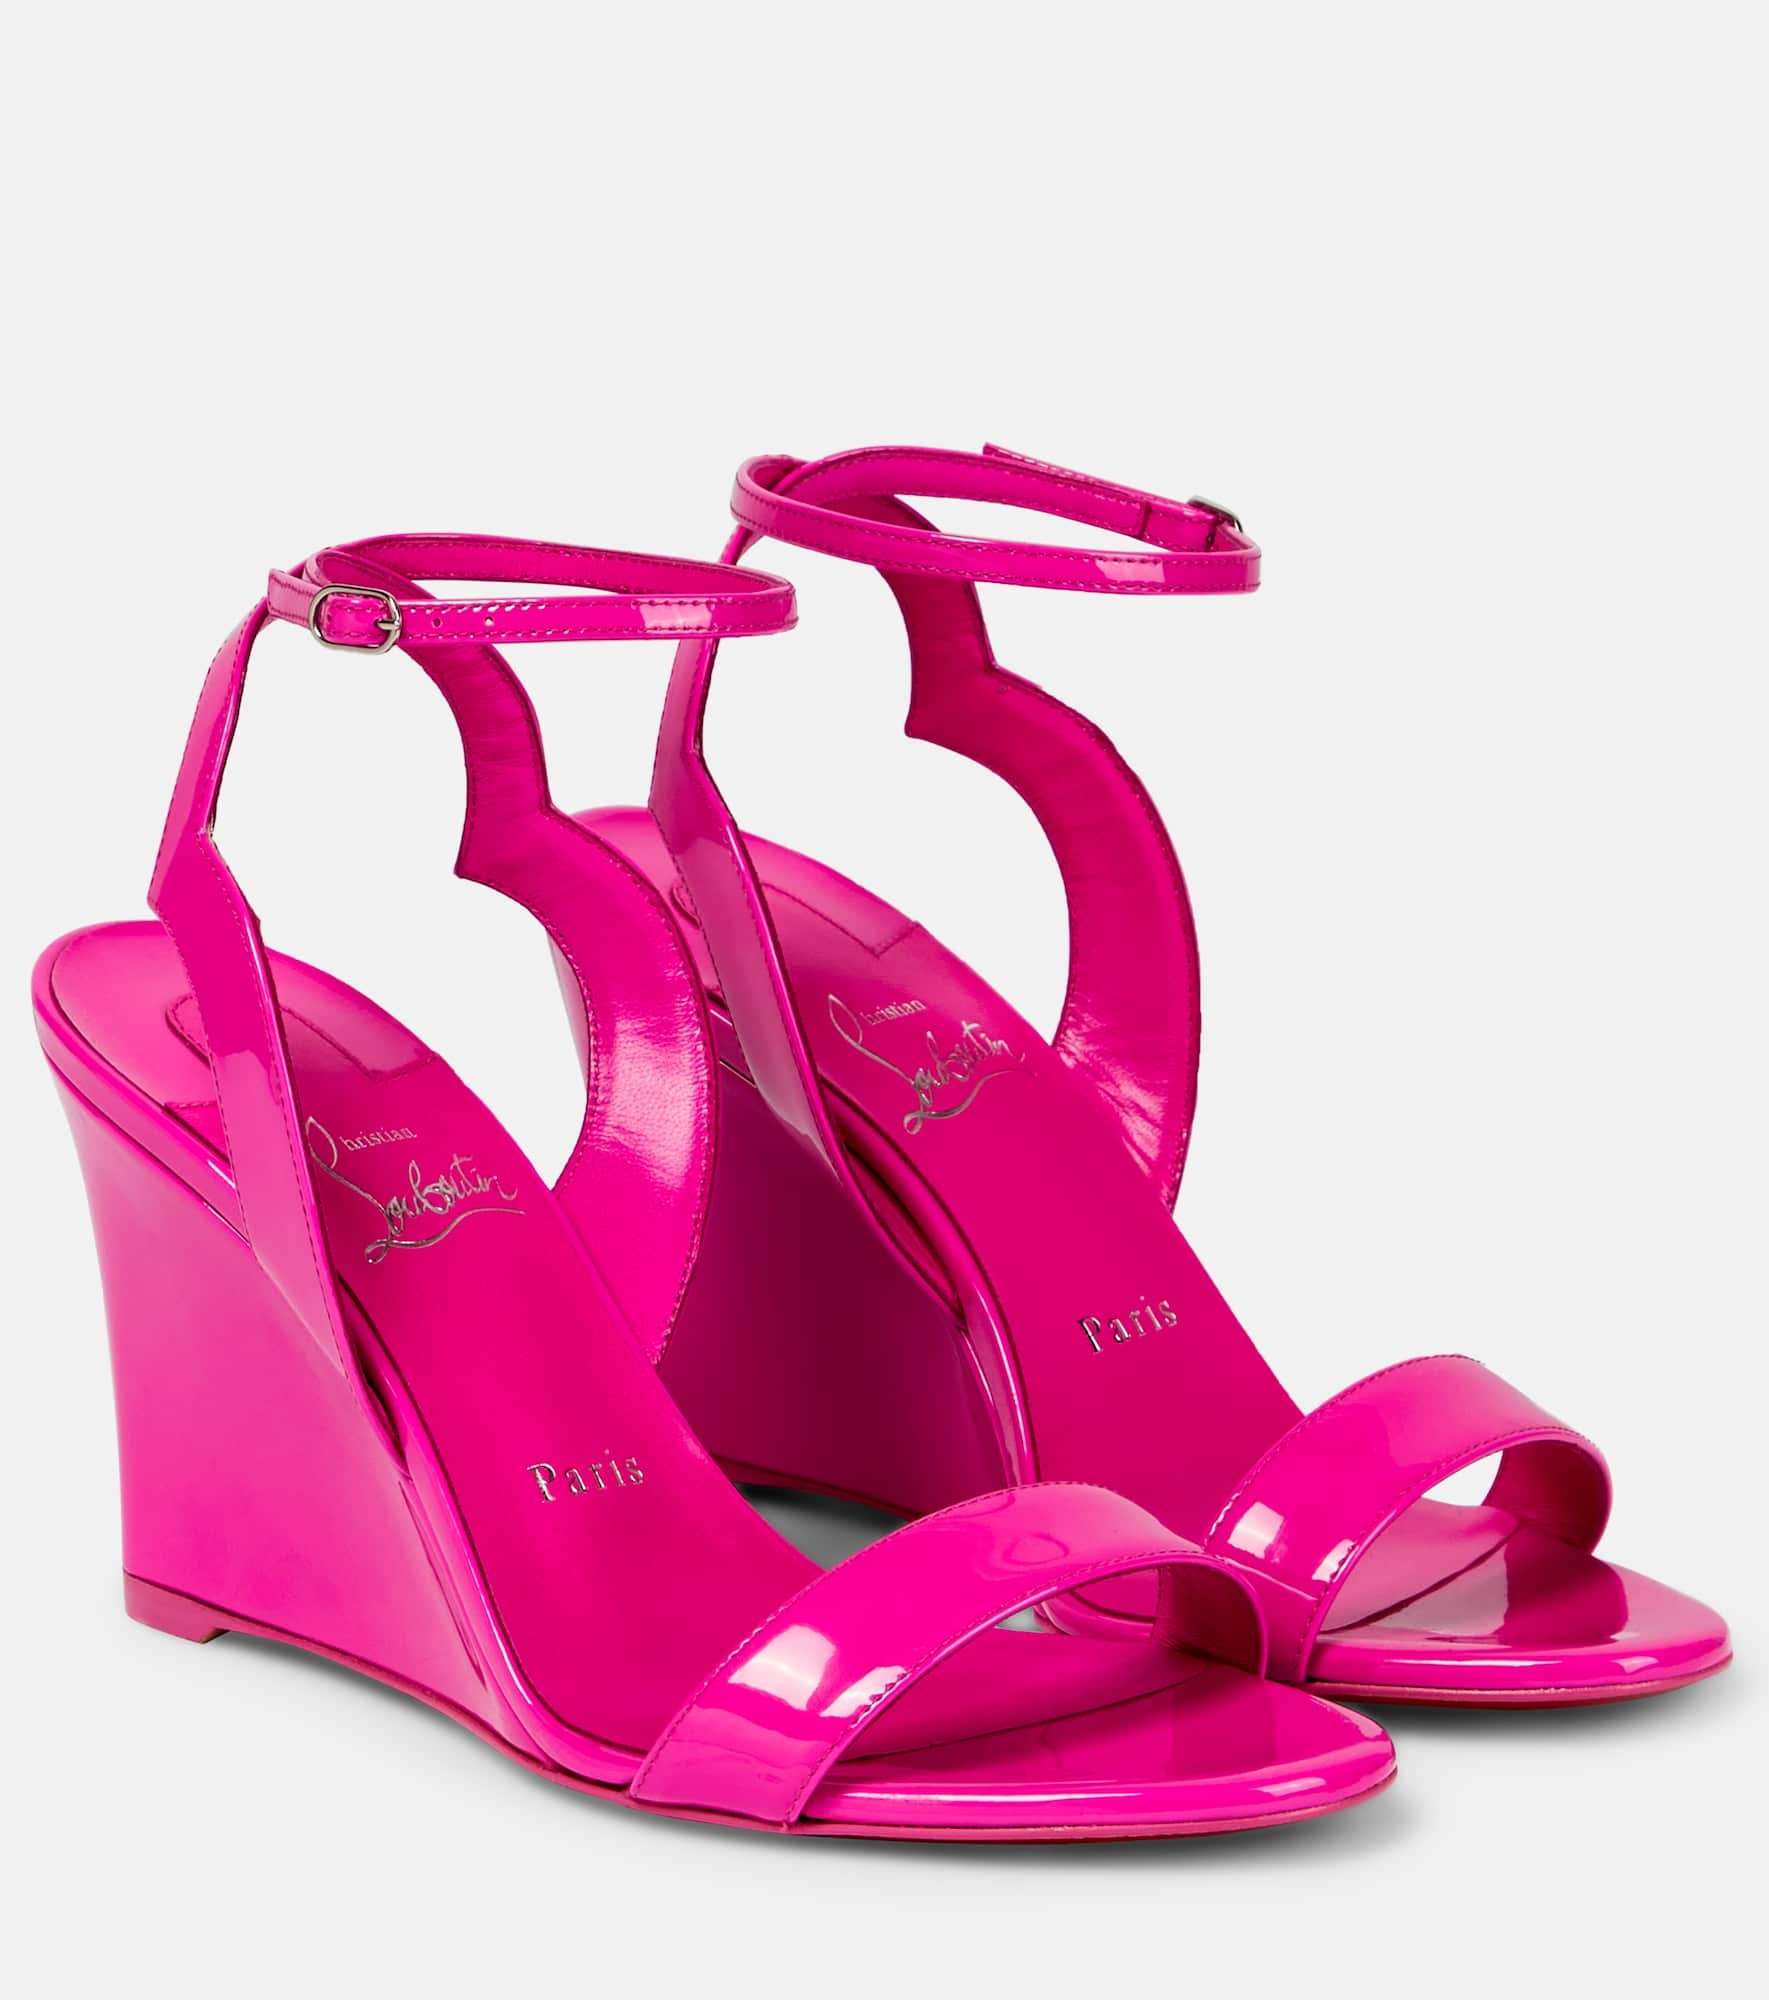 Patent leather wedge sandals - 1